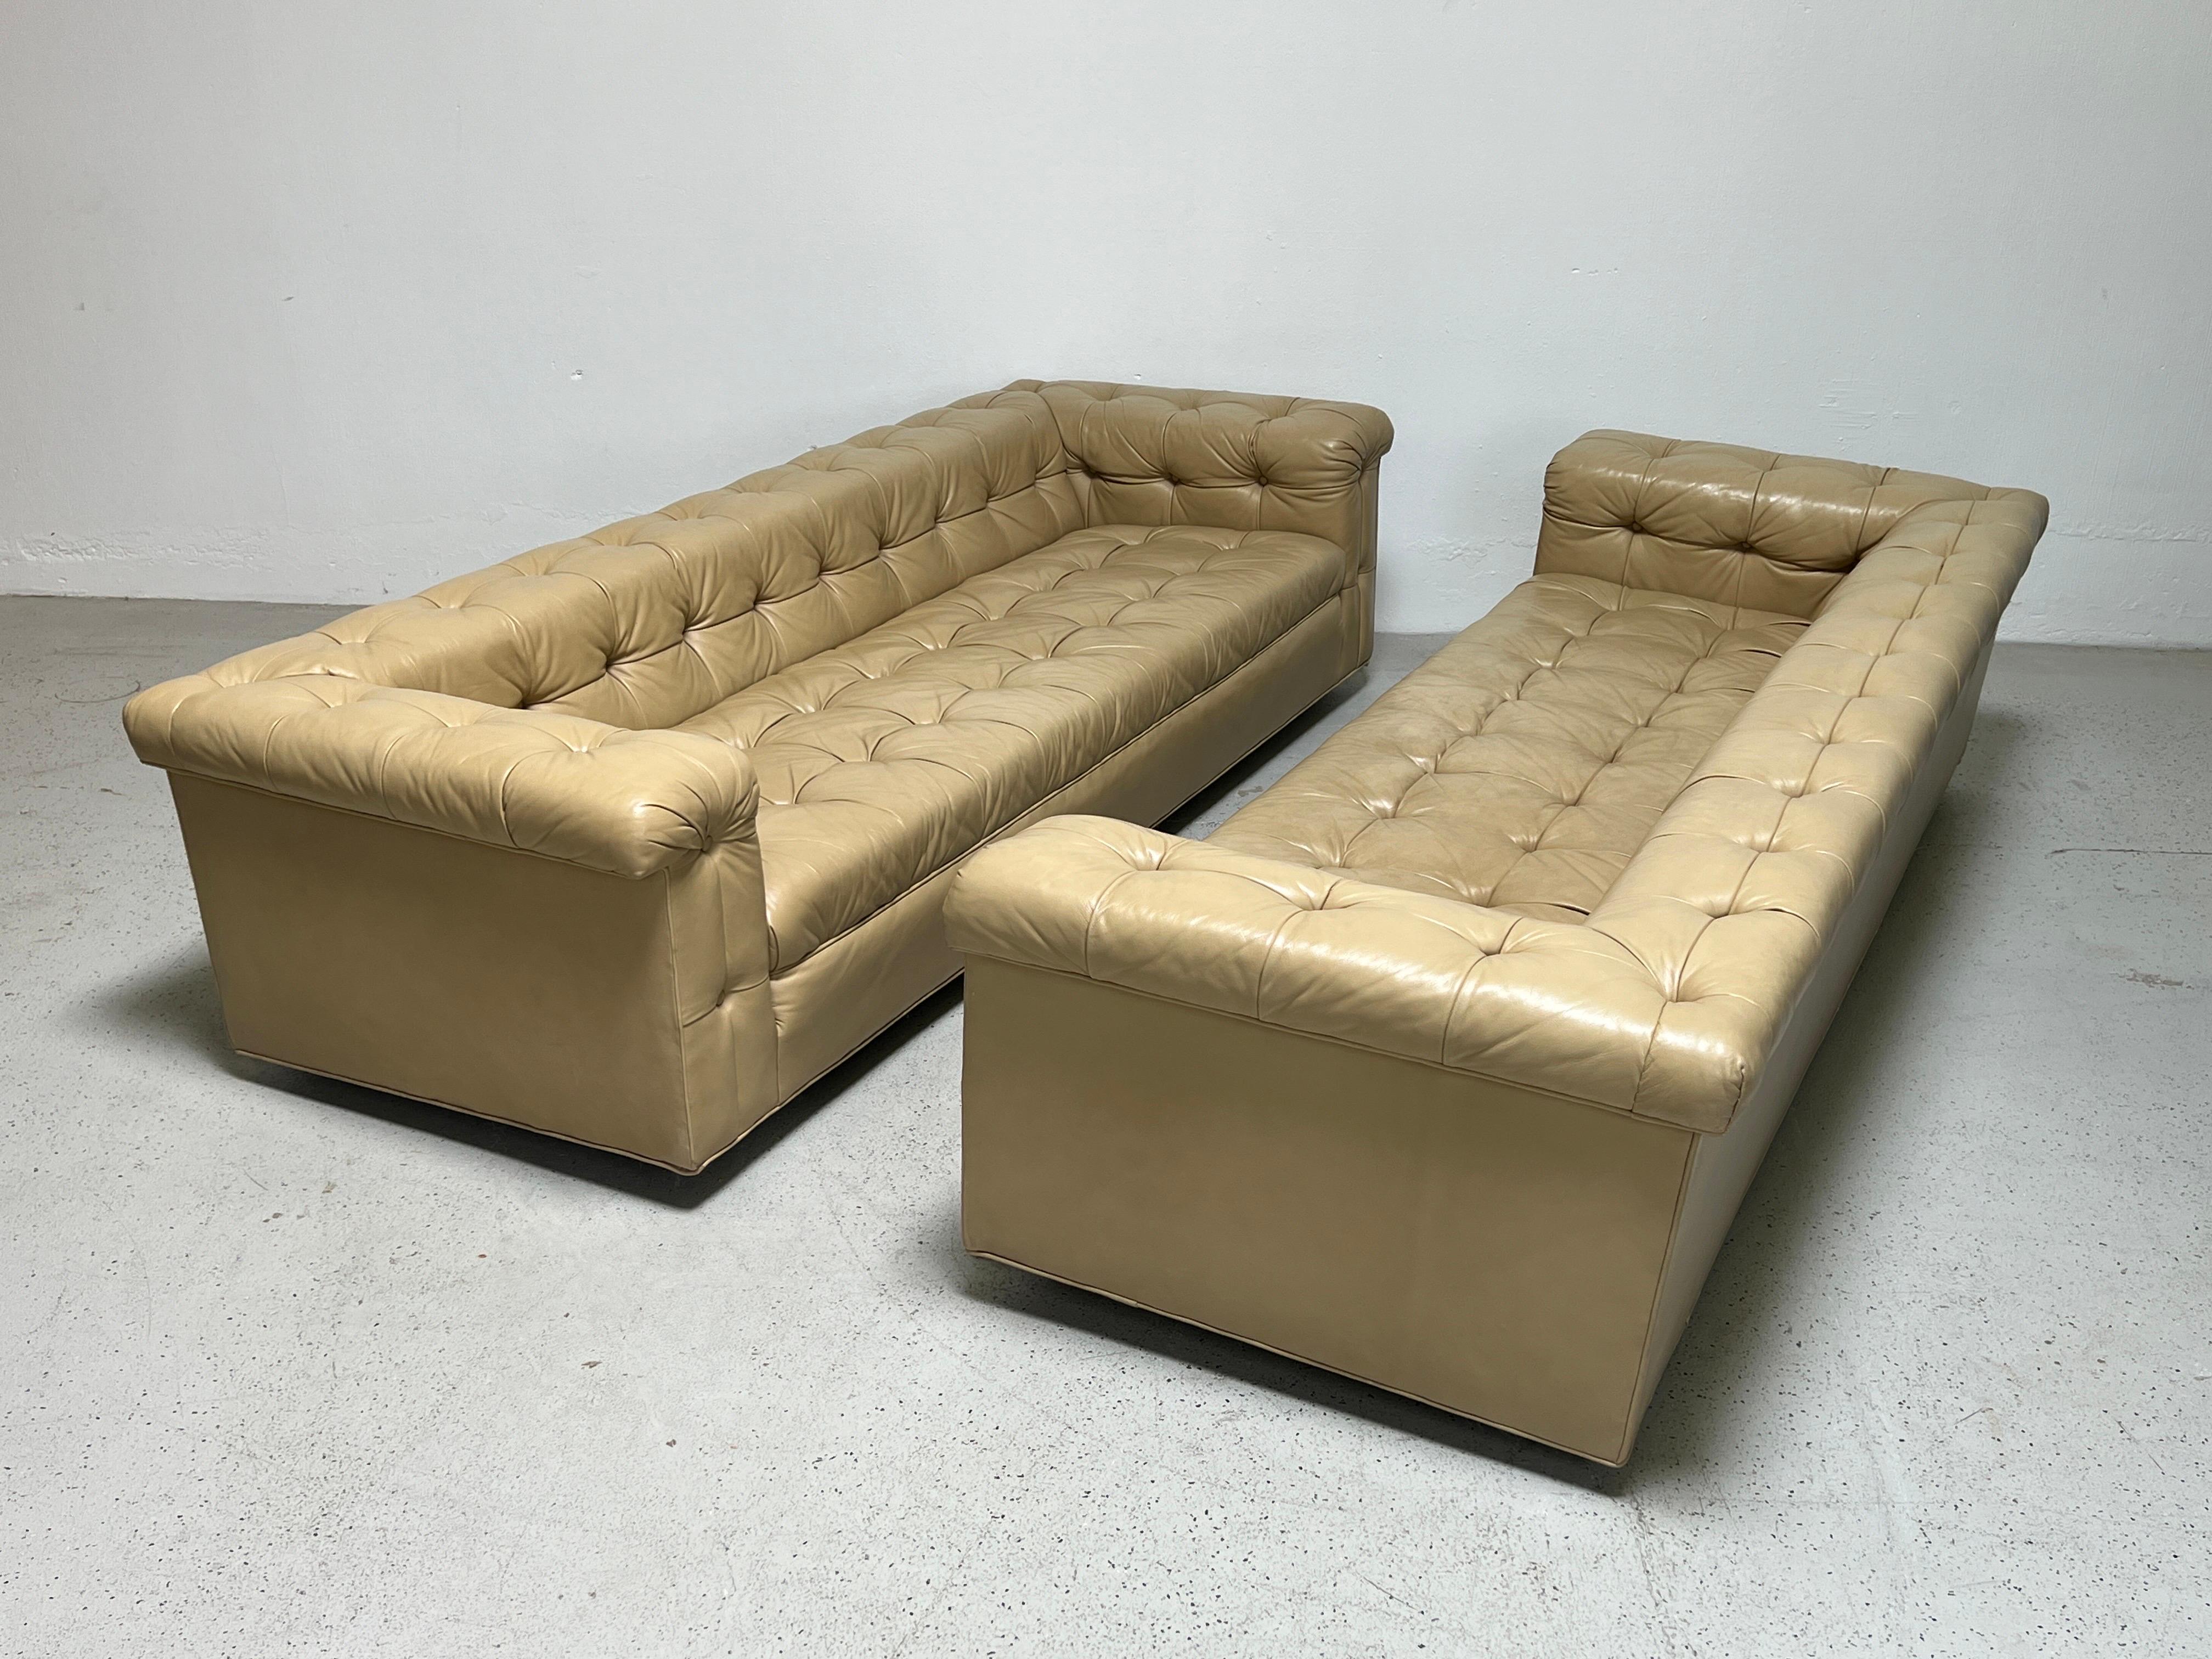 Pair of Party Sofas by Edward Wormley for Dunbar in Original Leather For Sale 11